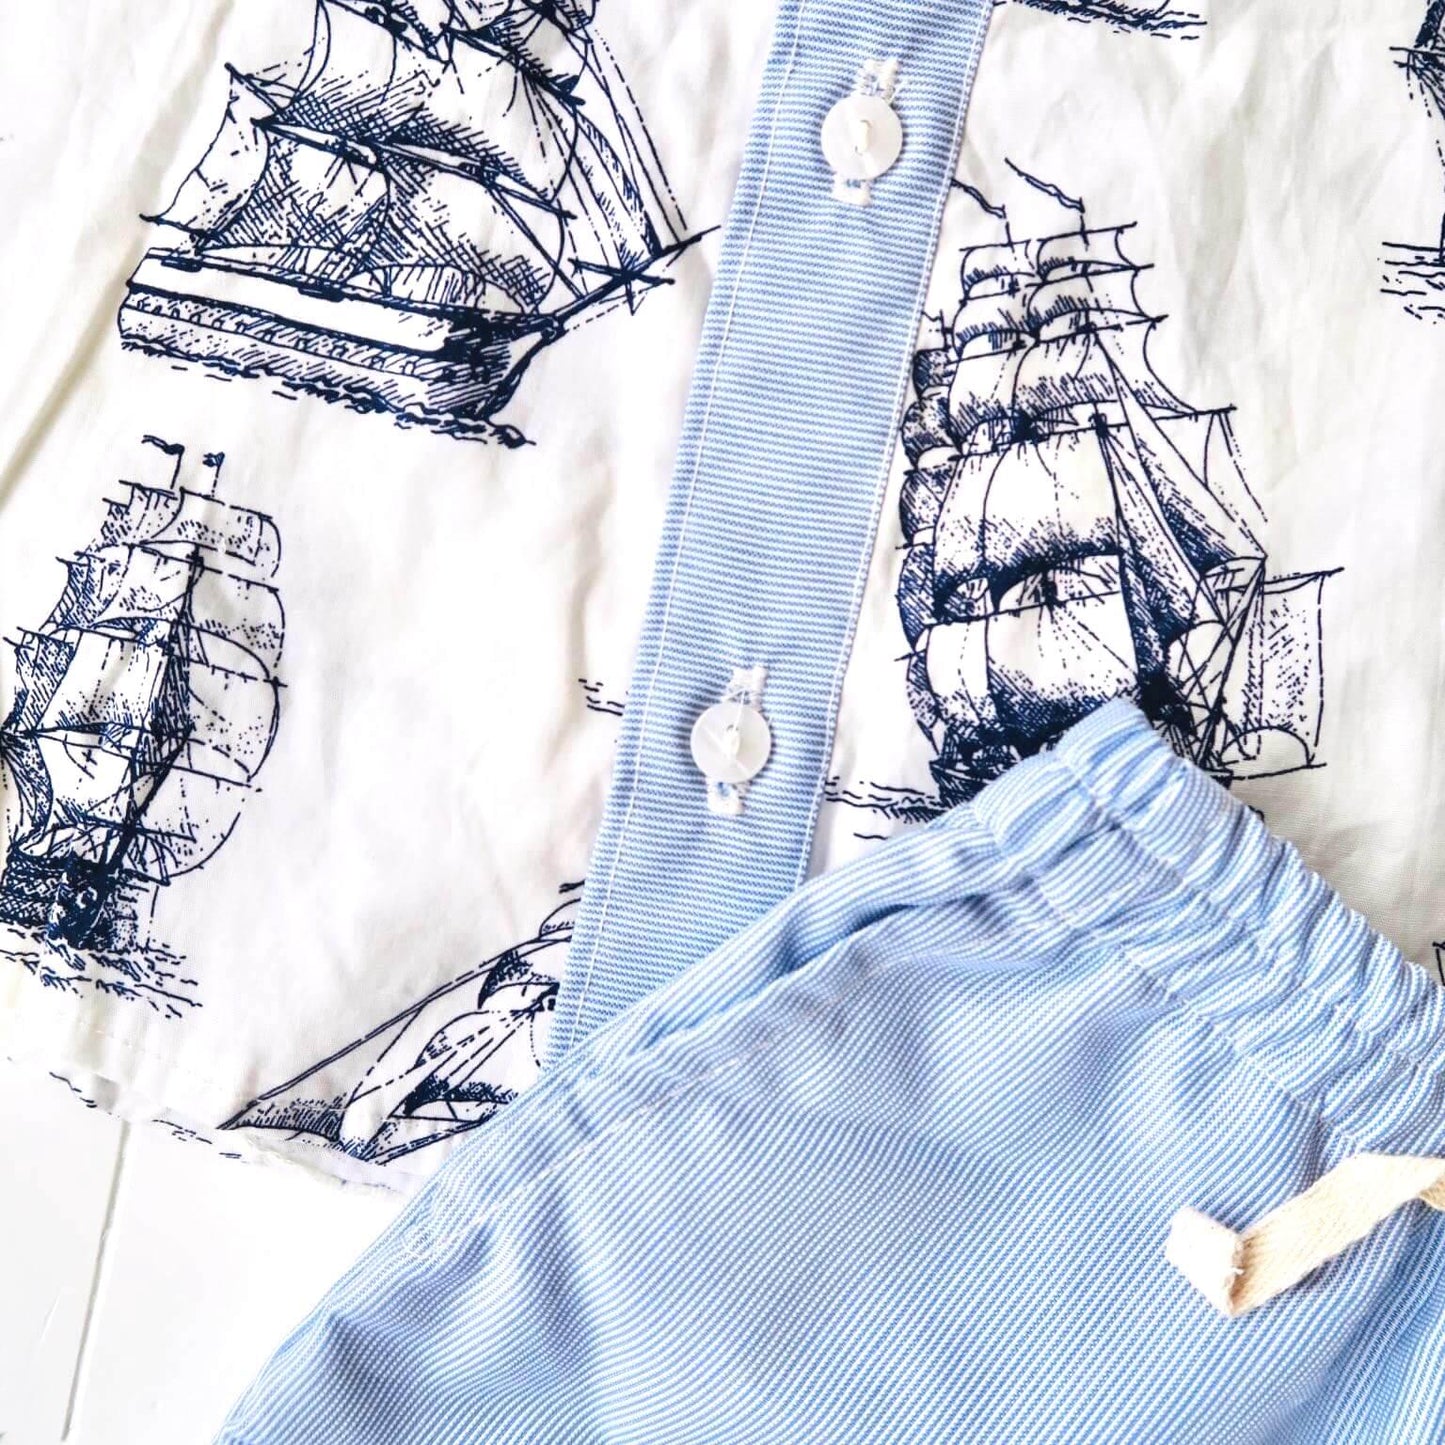 Birch Top & Shorts in Galleon White and Light Blue Pinstripes - Lil' Tati